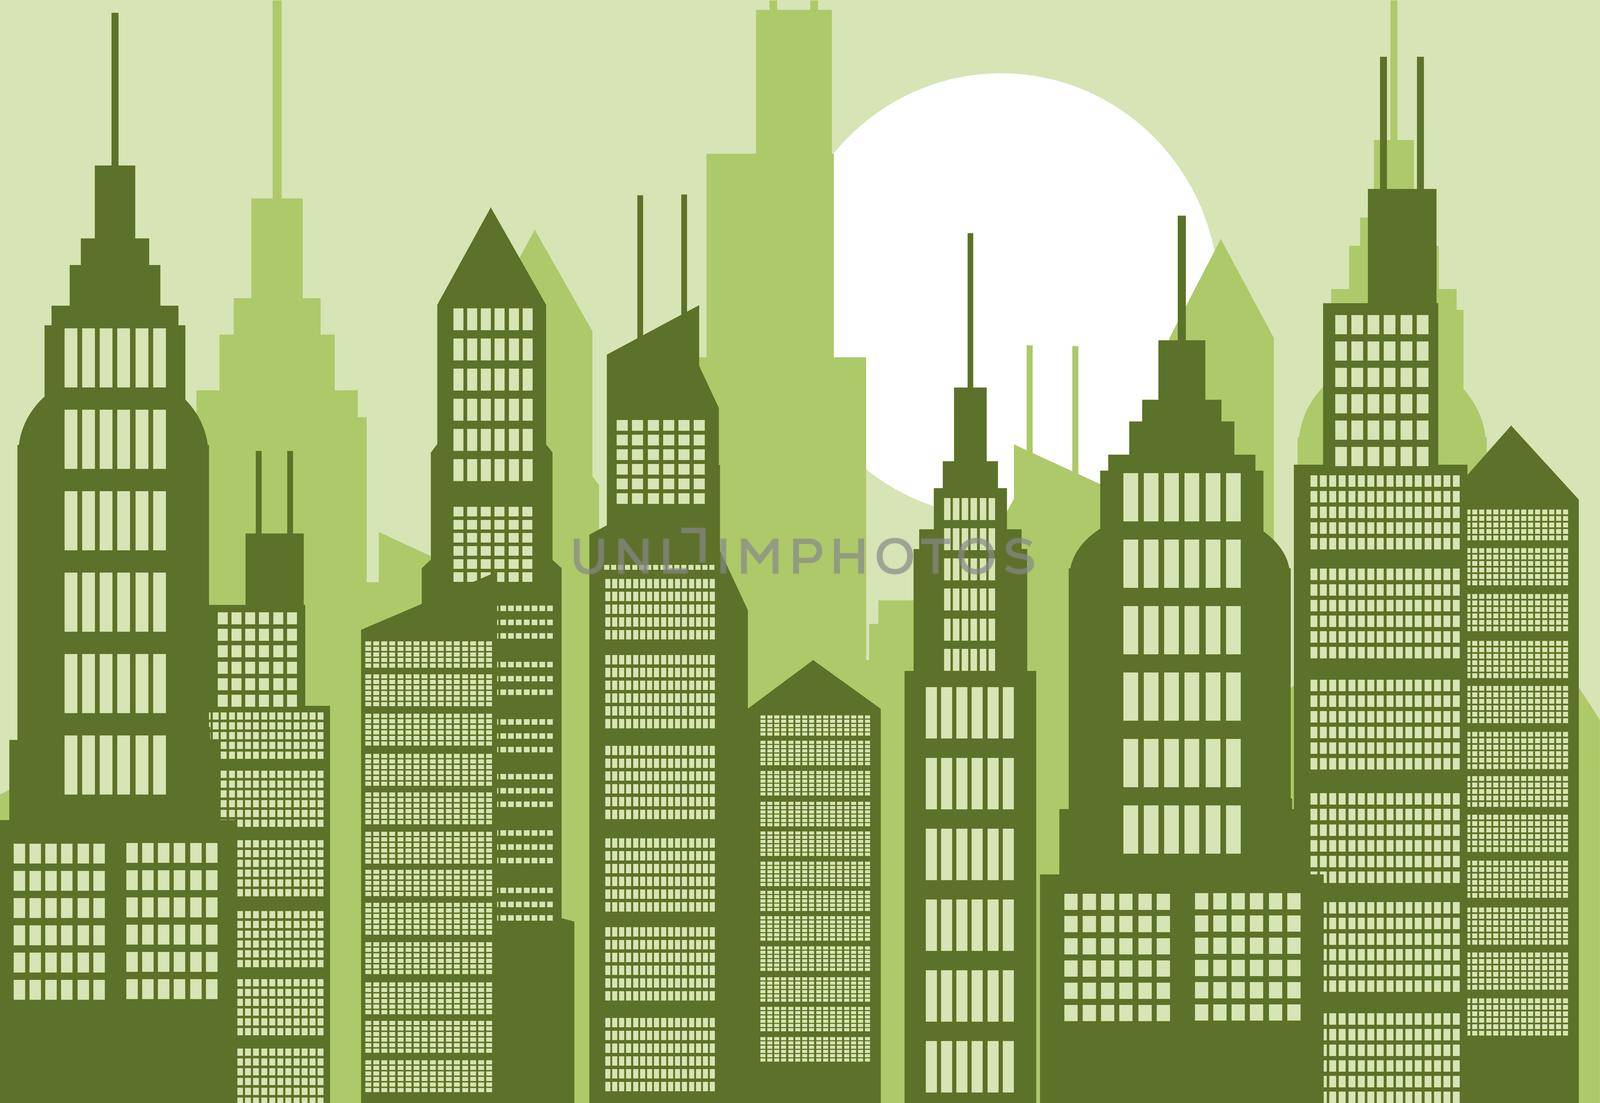 Cartoon Abstract City illustration with Many Buildings and Skyscrapers. Urban Illustration.  by welcomia